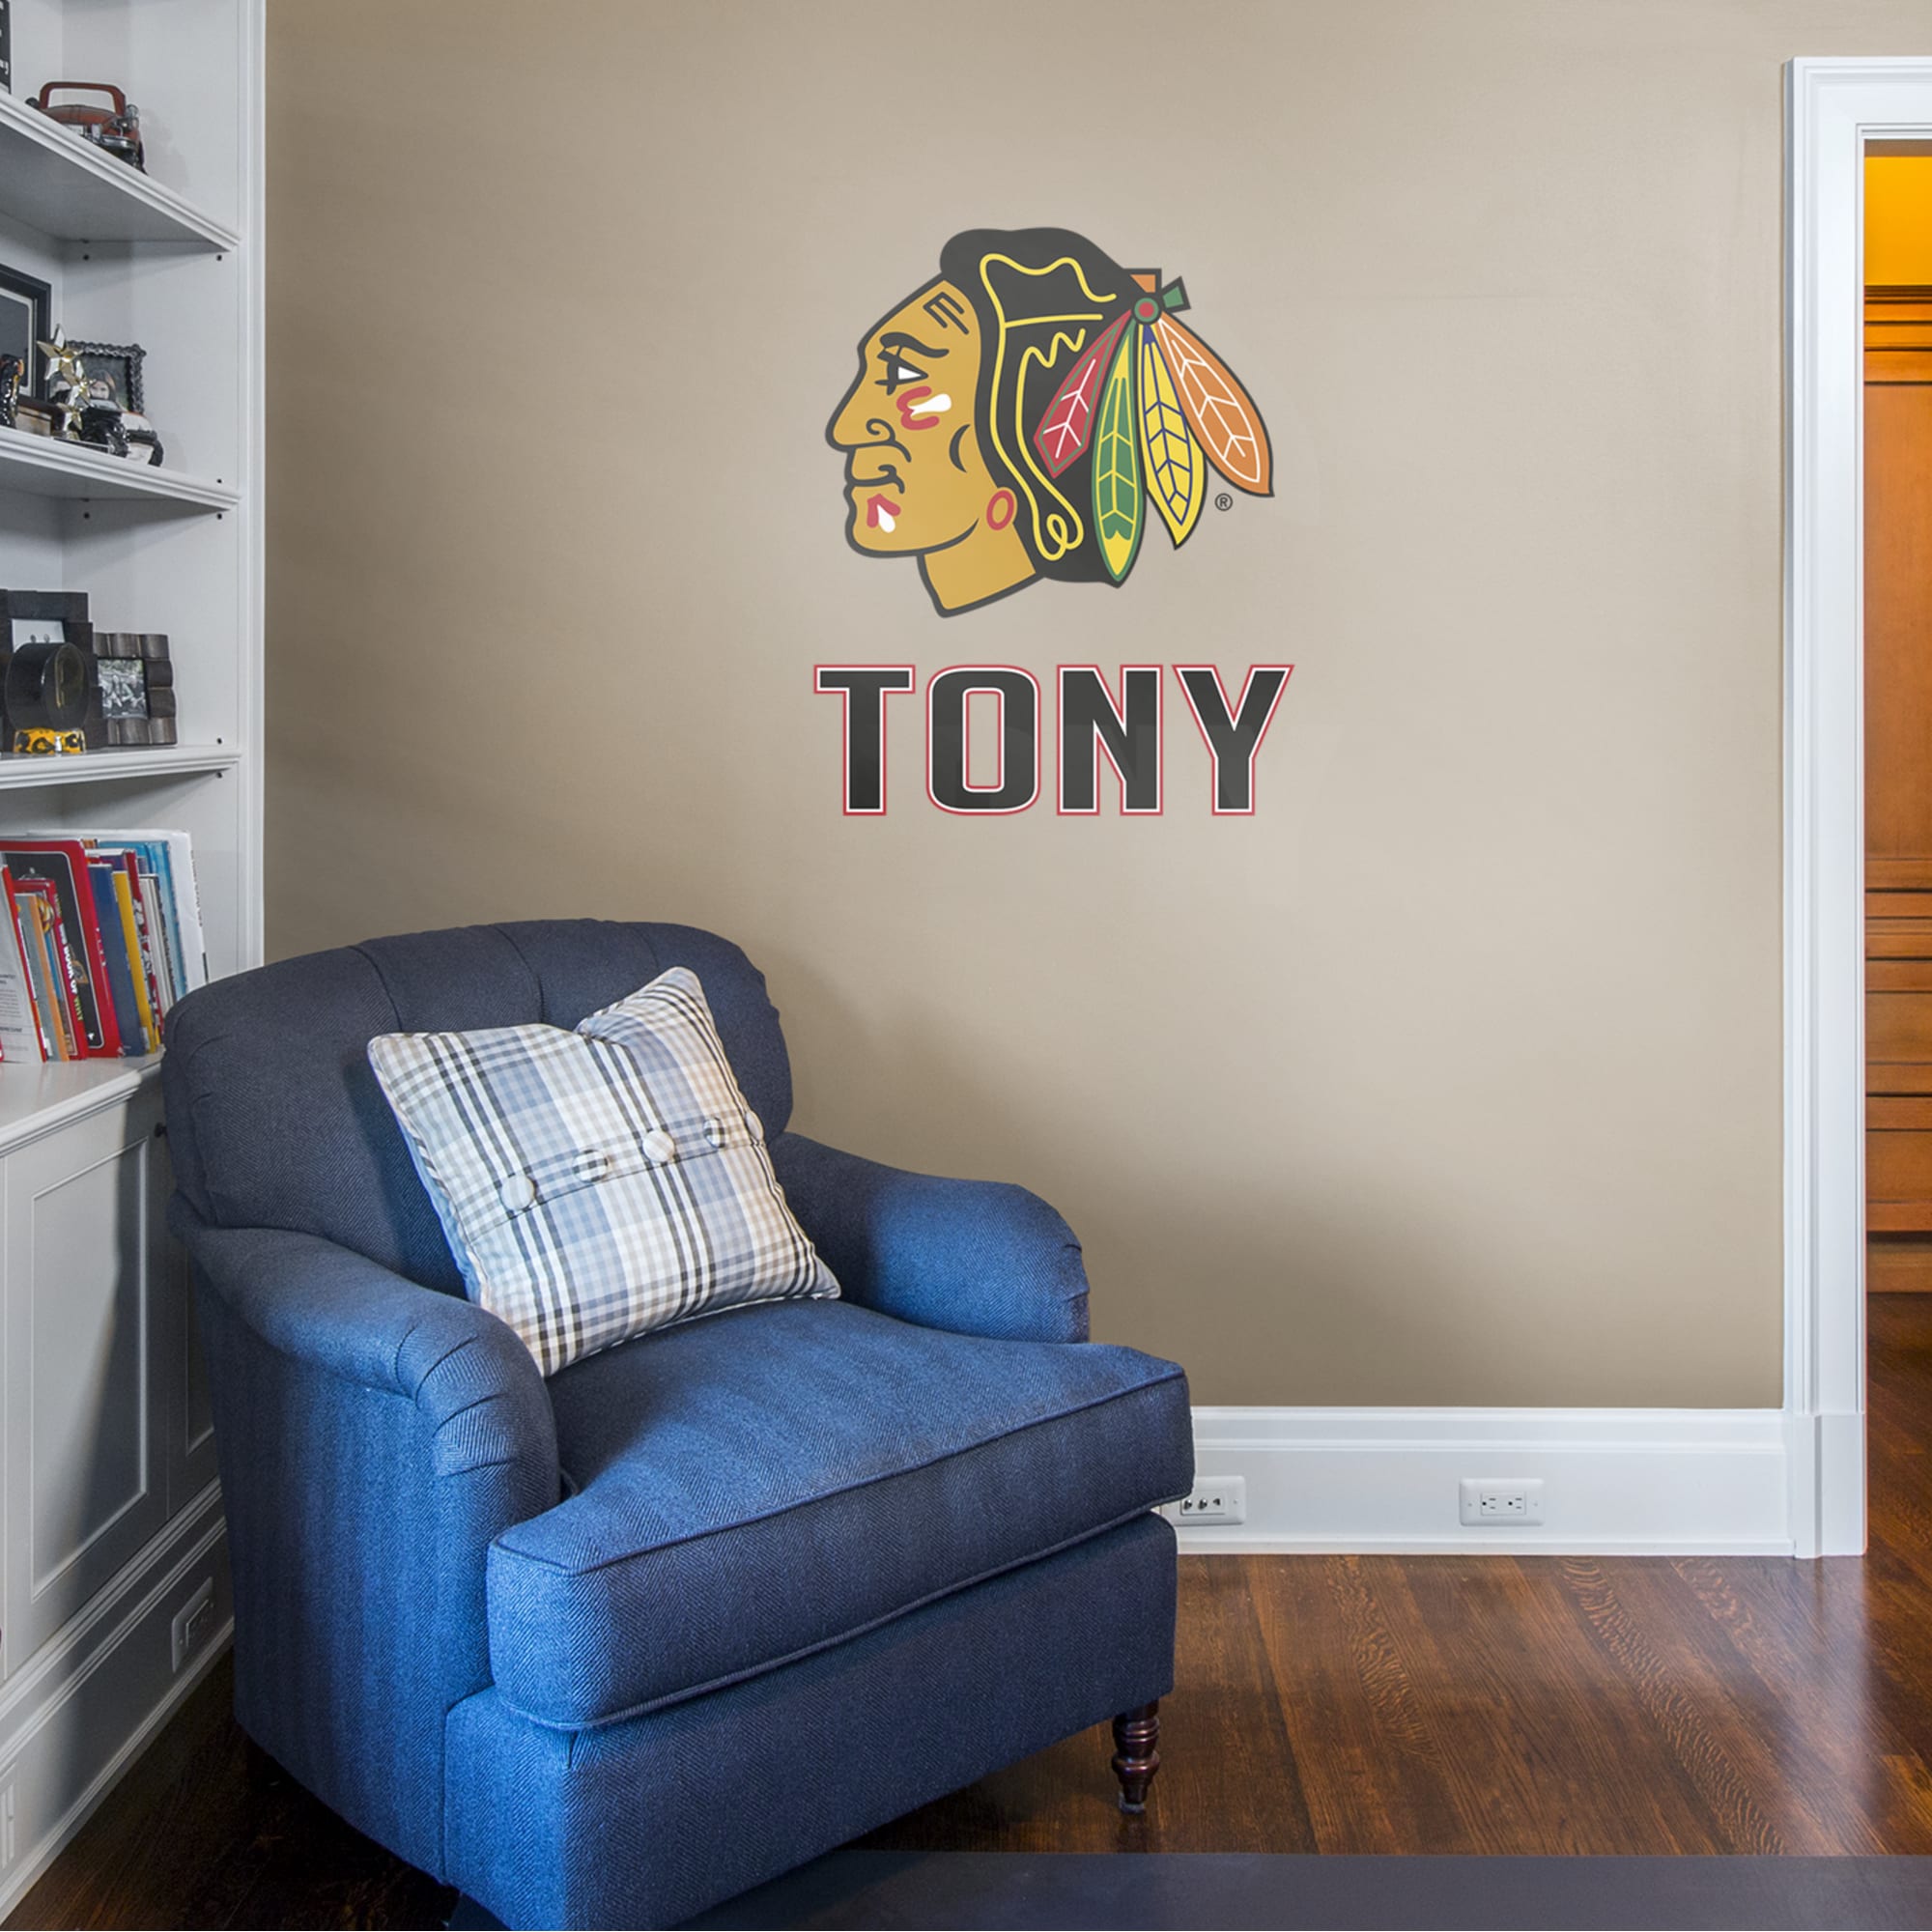 Chicago Blackhawks: Stacked Personalized Name - Officially Licensed NHL Transfer Decal in Black (39.5"W x 52"H) by Fathead | Vin